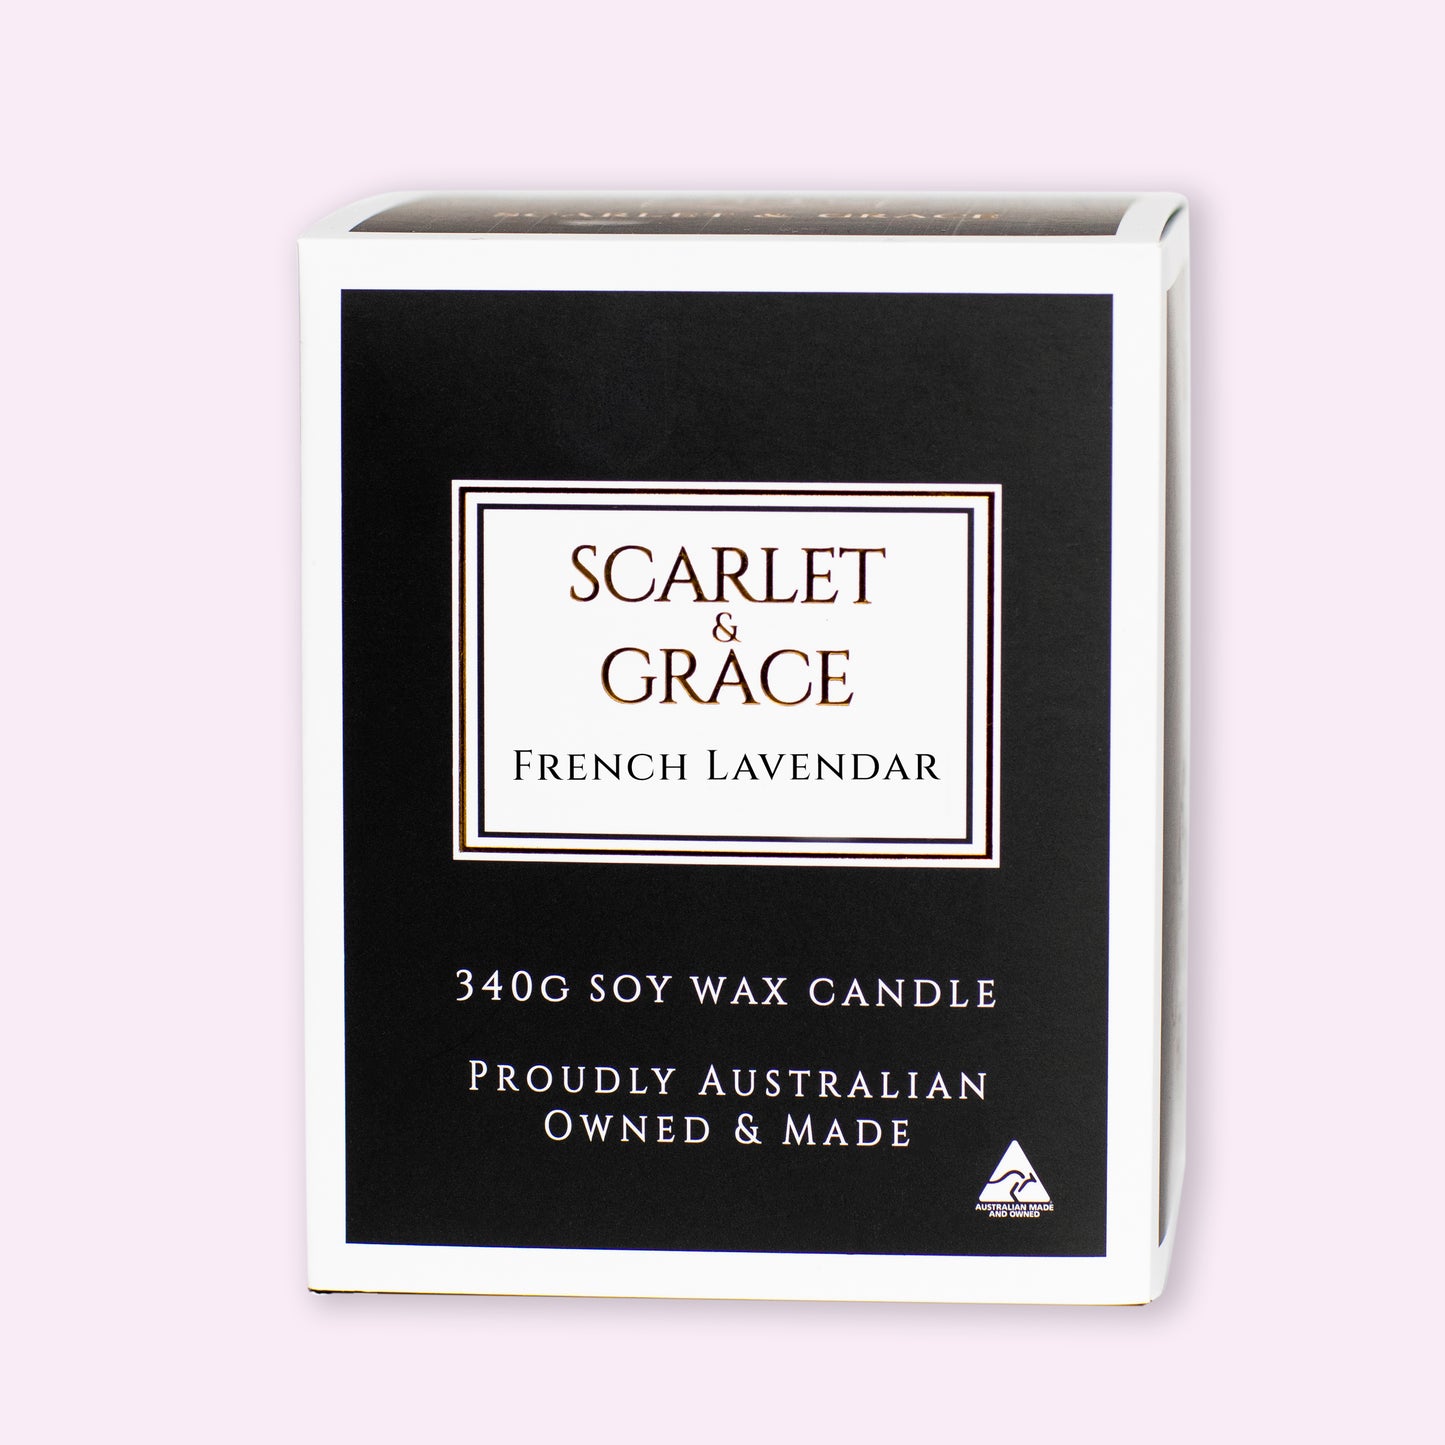 French Lavender - 340gm Soy Wax Candle - Scarlet & Grace